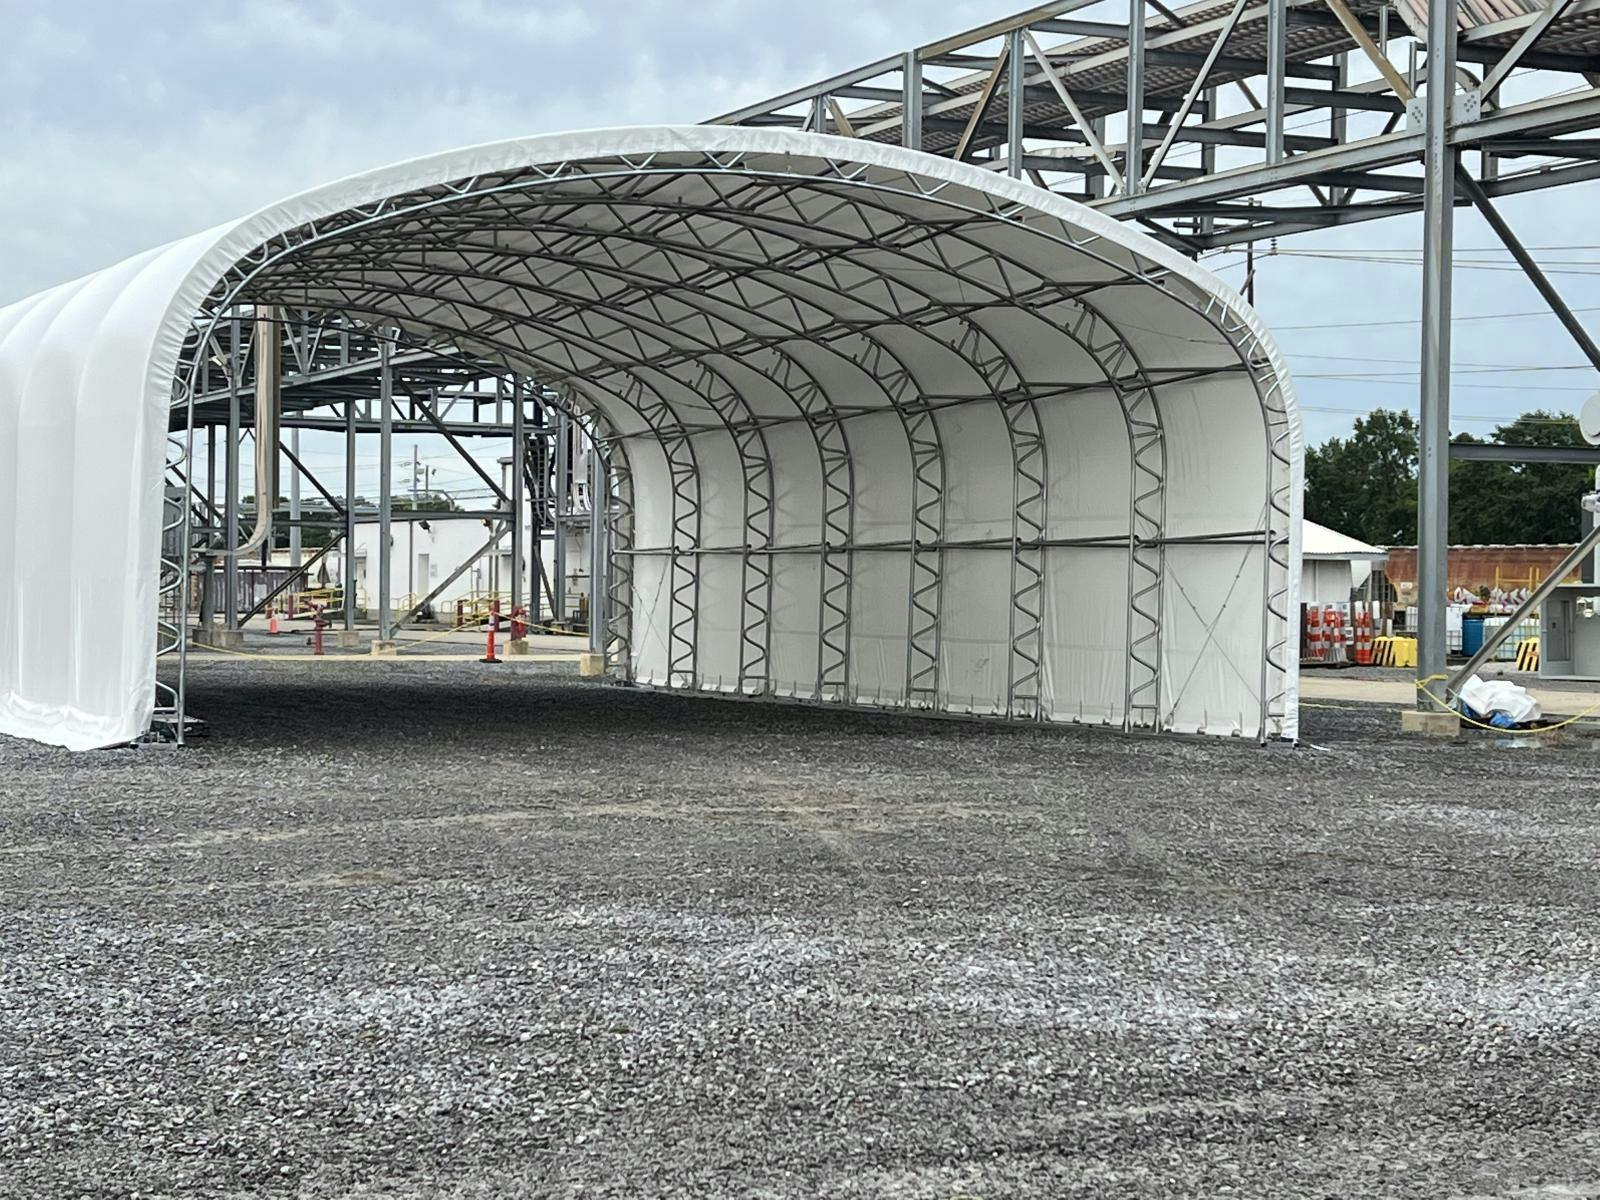 Industrial Fabric Shelter installed